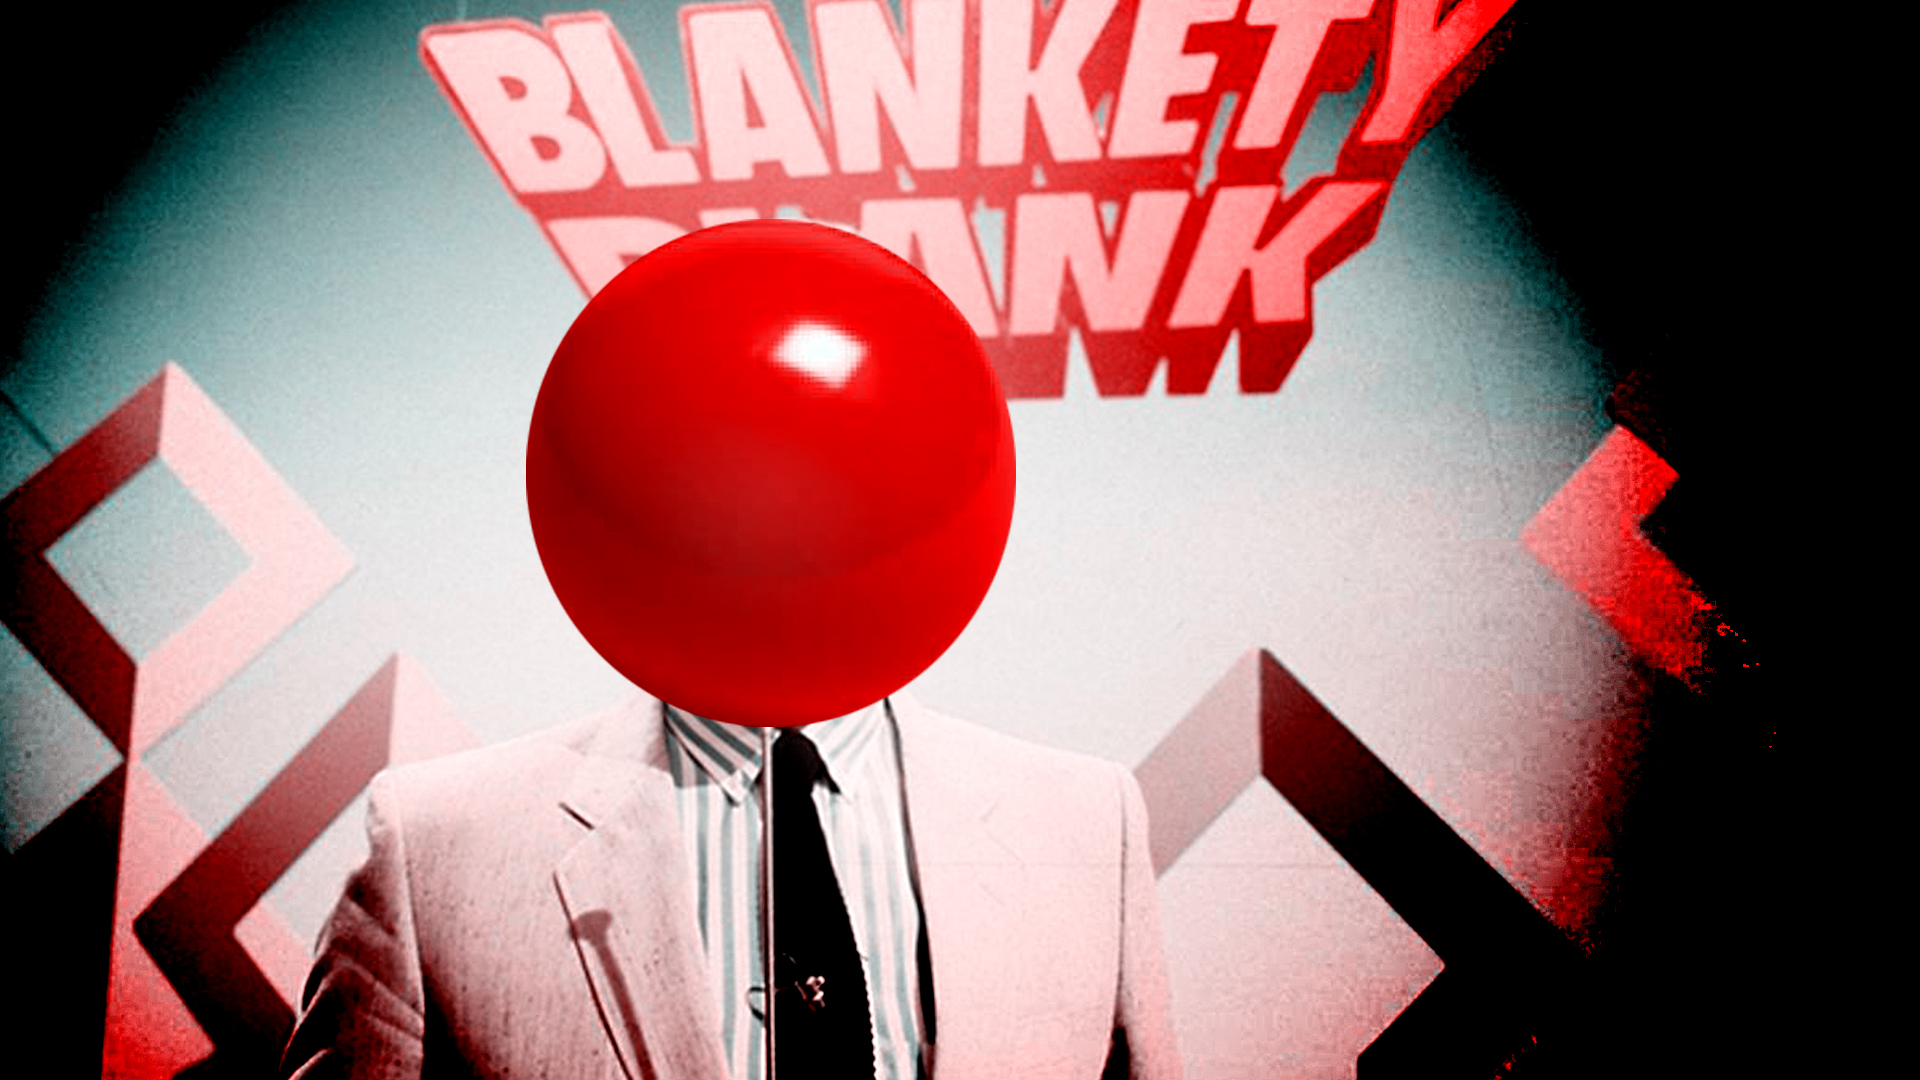 Comic Relief Blankety Blank